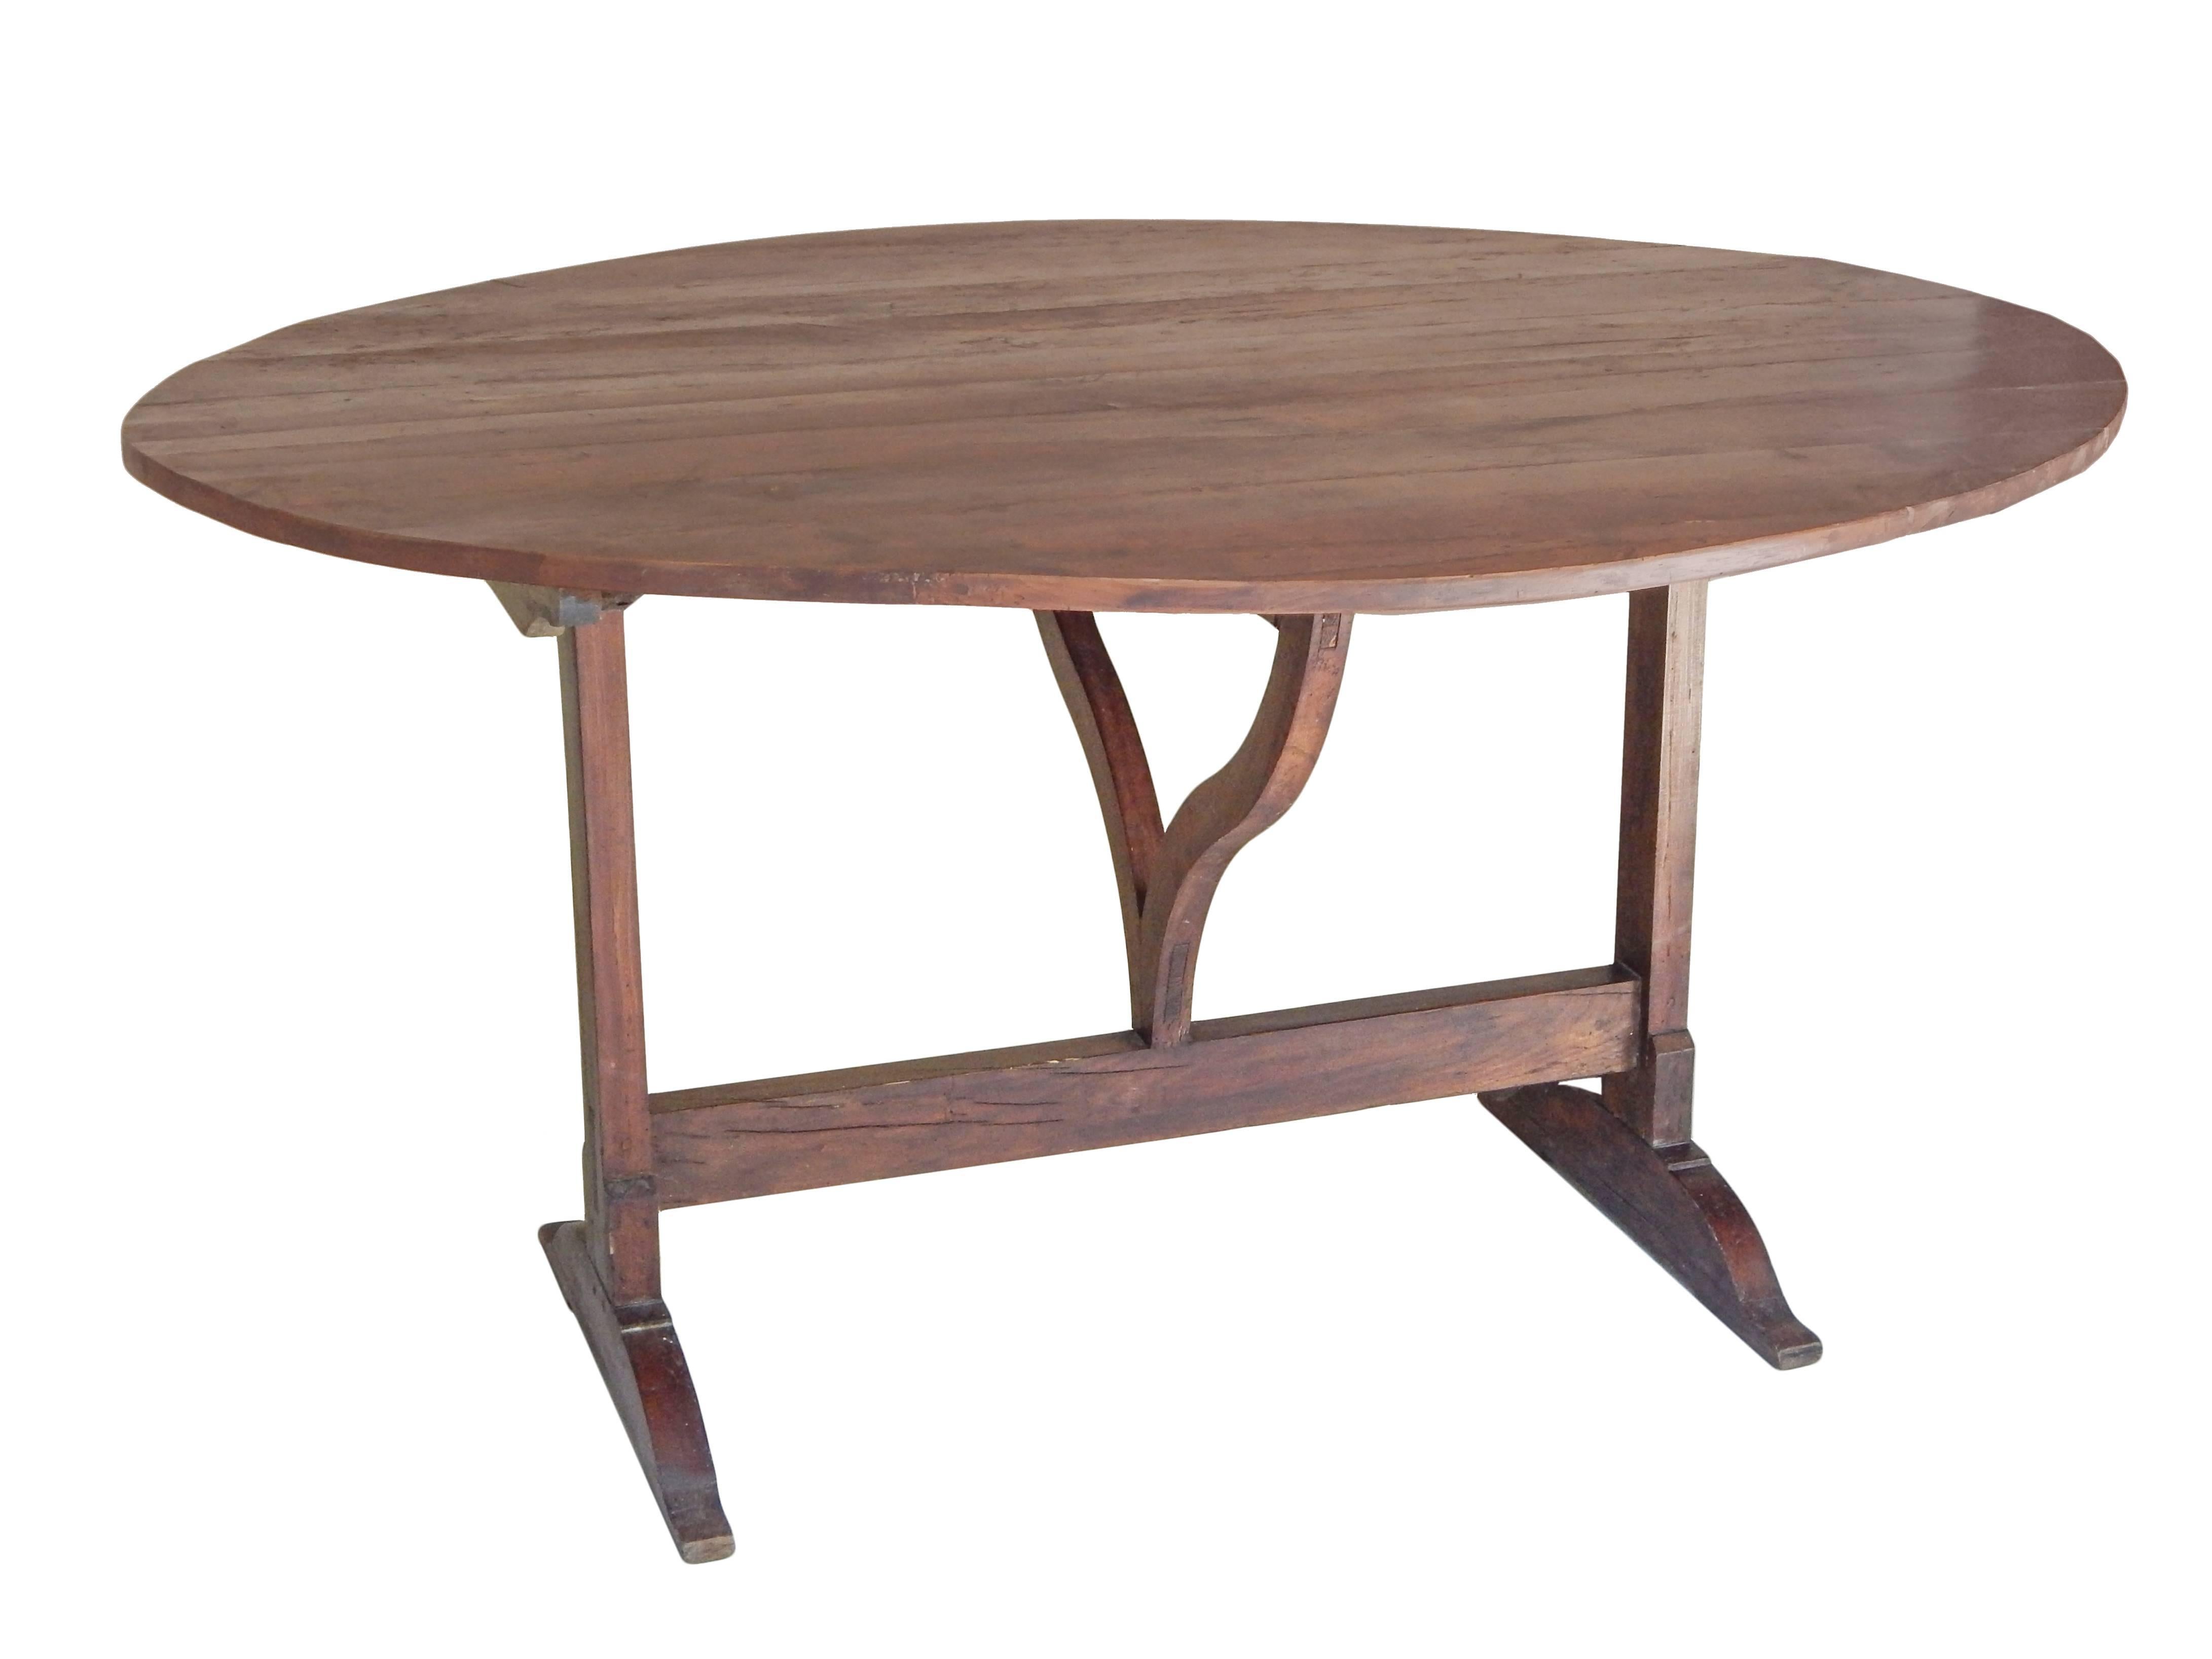 Very fine oval French wine tasting table with beautiful age patina.